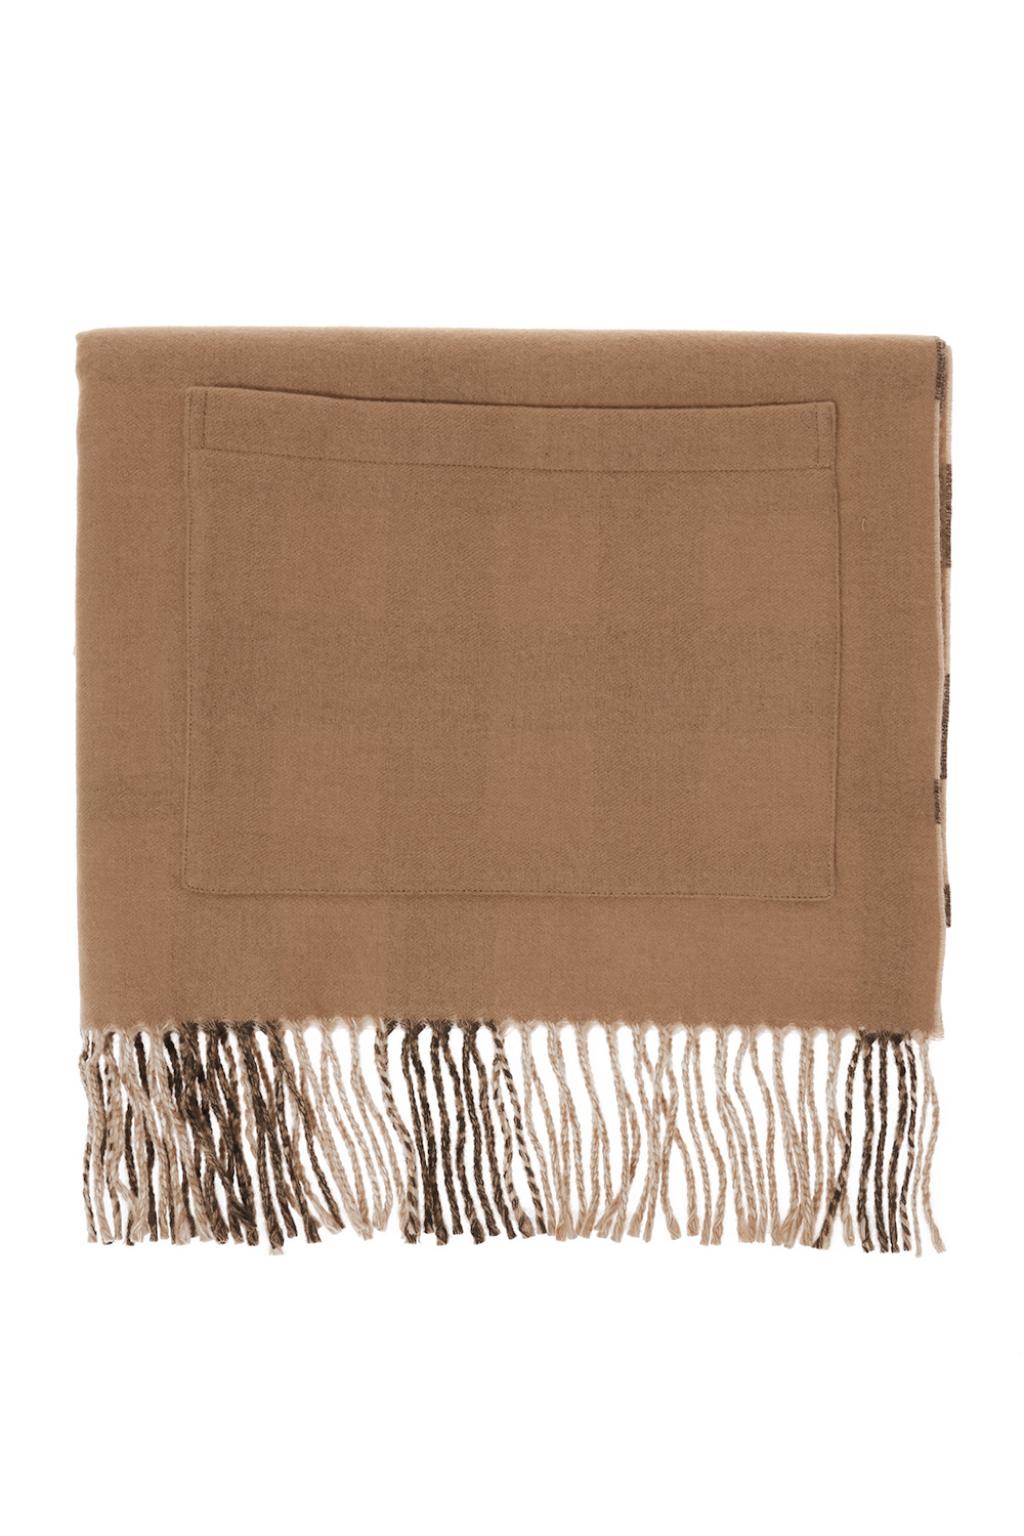 Burberry Scarf with pockets | Women's Accessories | Vitkac